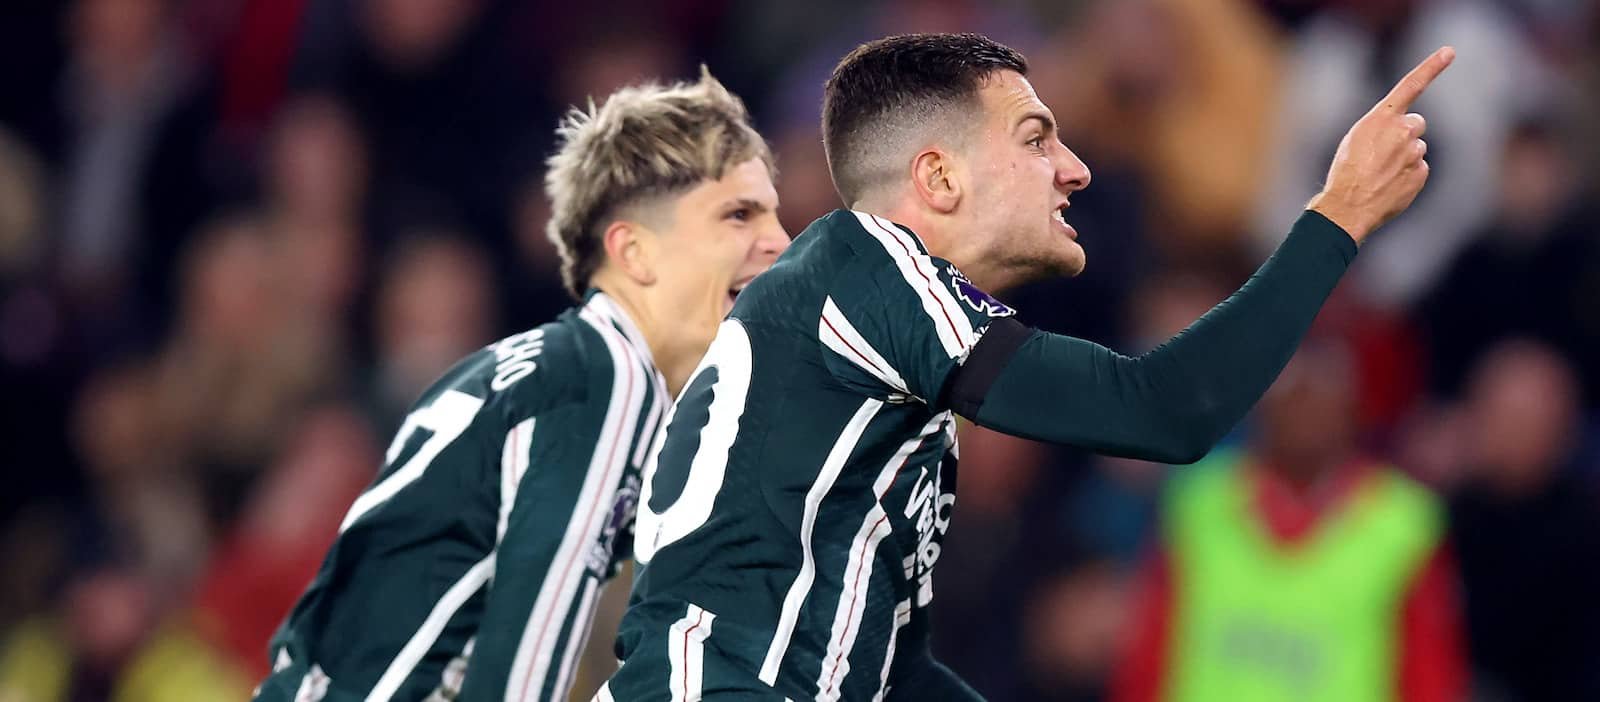 “I thought he might save it”: Diogo Dalot explains his wonder strike that sealed win vs. Sheffield United – Man United News And Transfer News